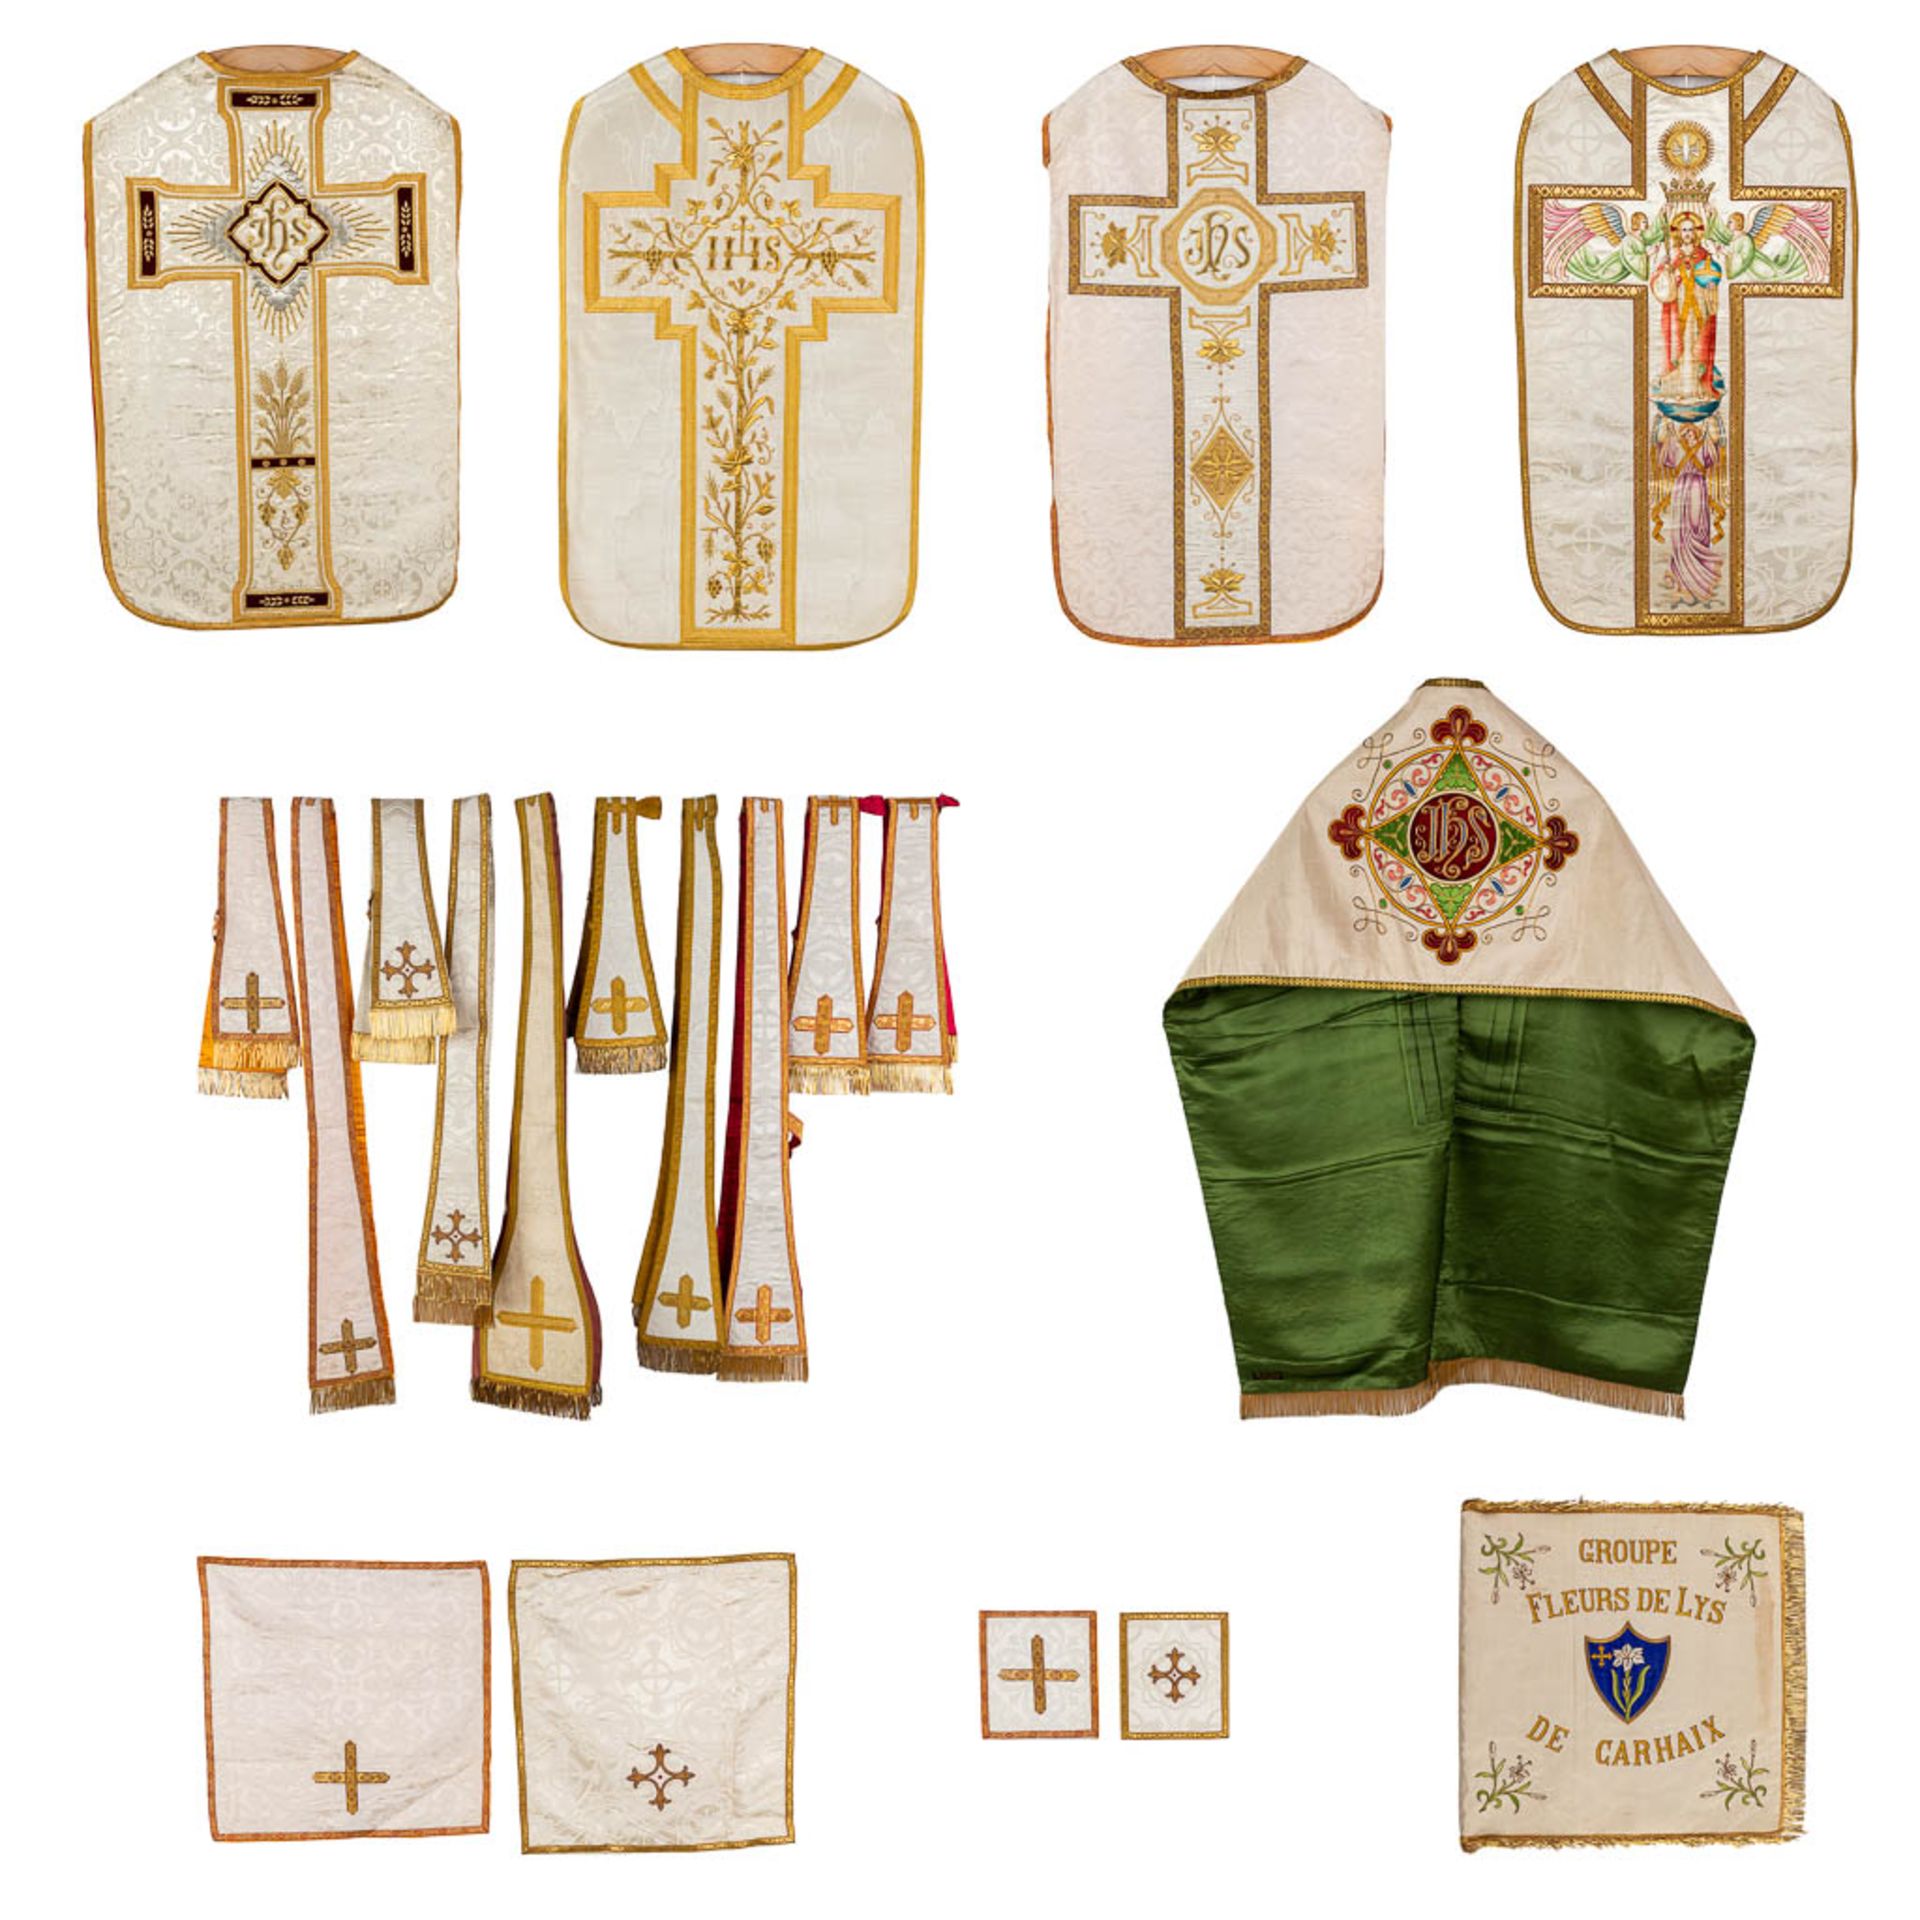 A set of Lithurgical Robes and accessories. Thick gold thread and embroideries.